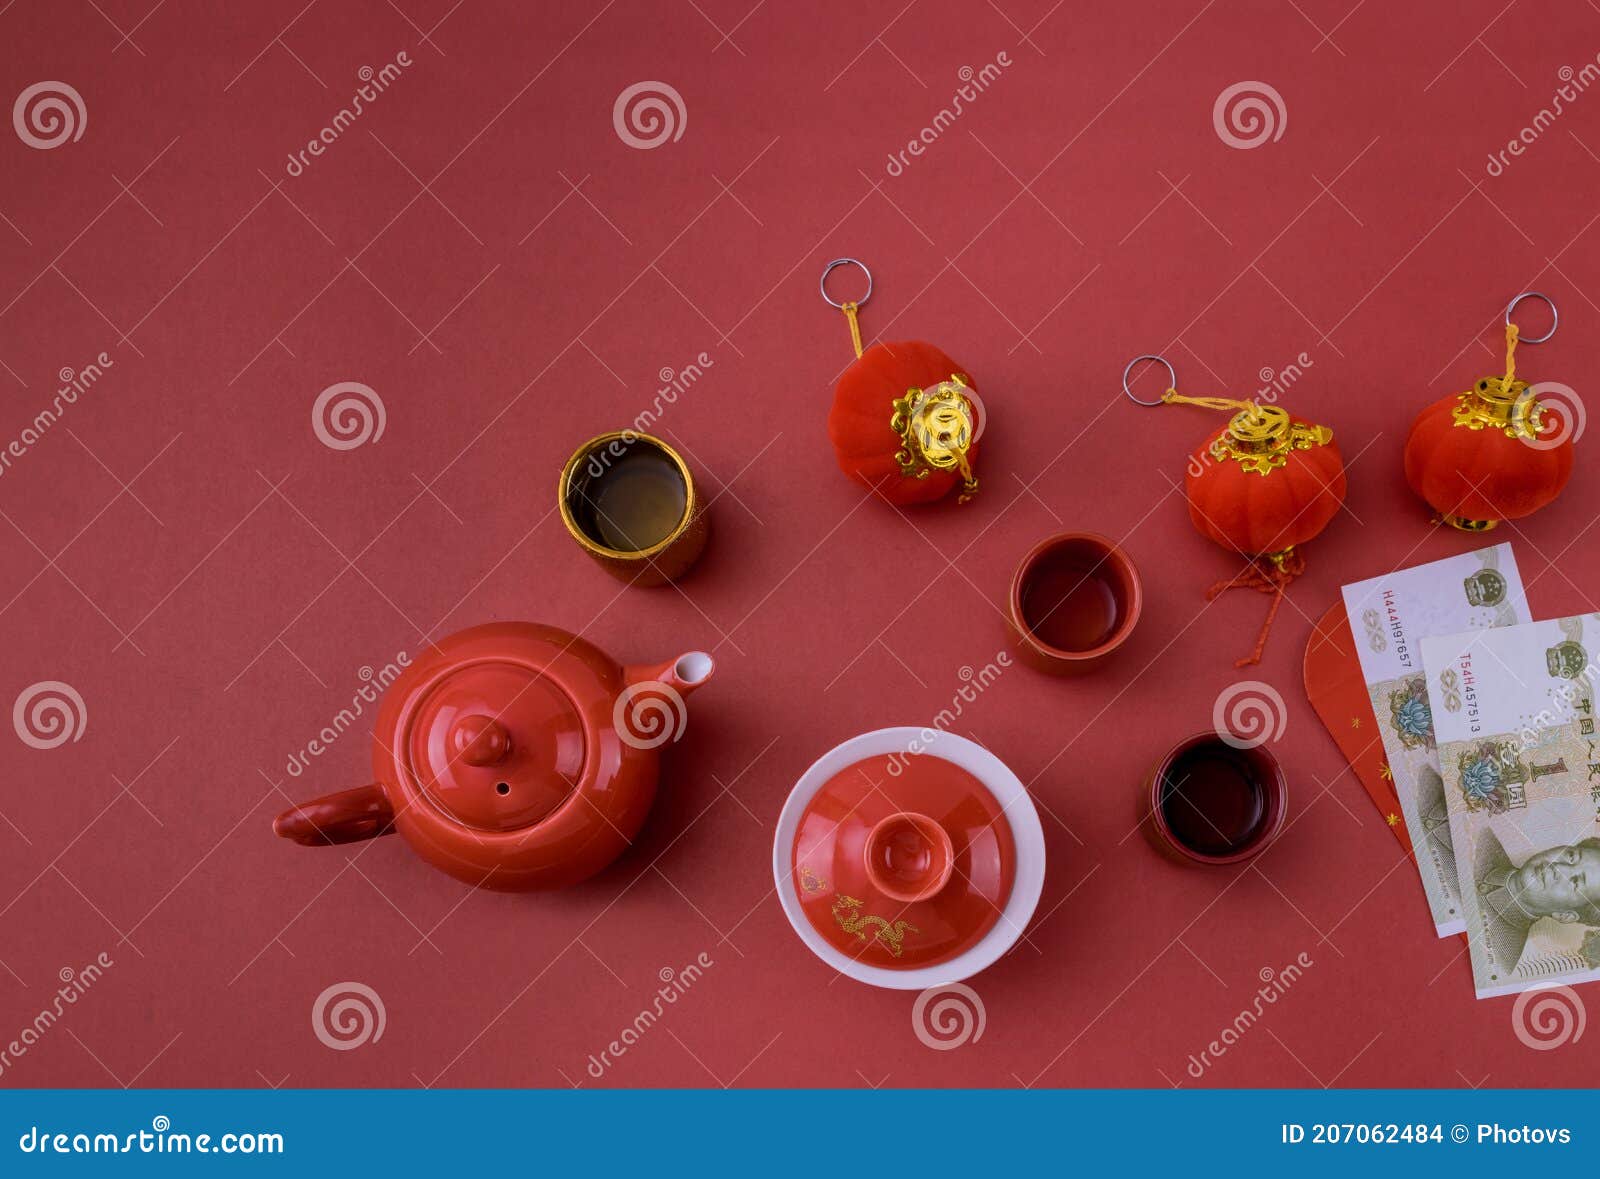 Chinese New Year Decoration Decorations of Accessories in Traditional Mandarin Oranges on Red Background Stock Photo - Image of tradition, food: 207062484